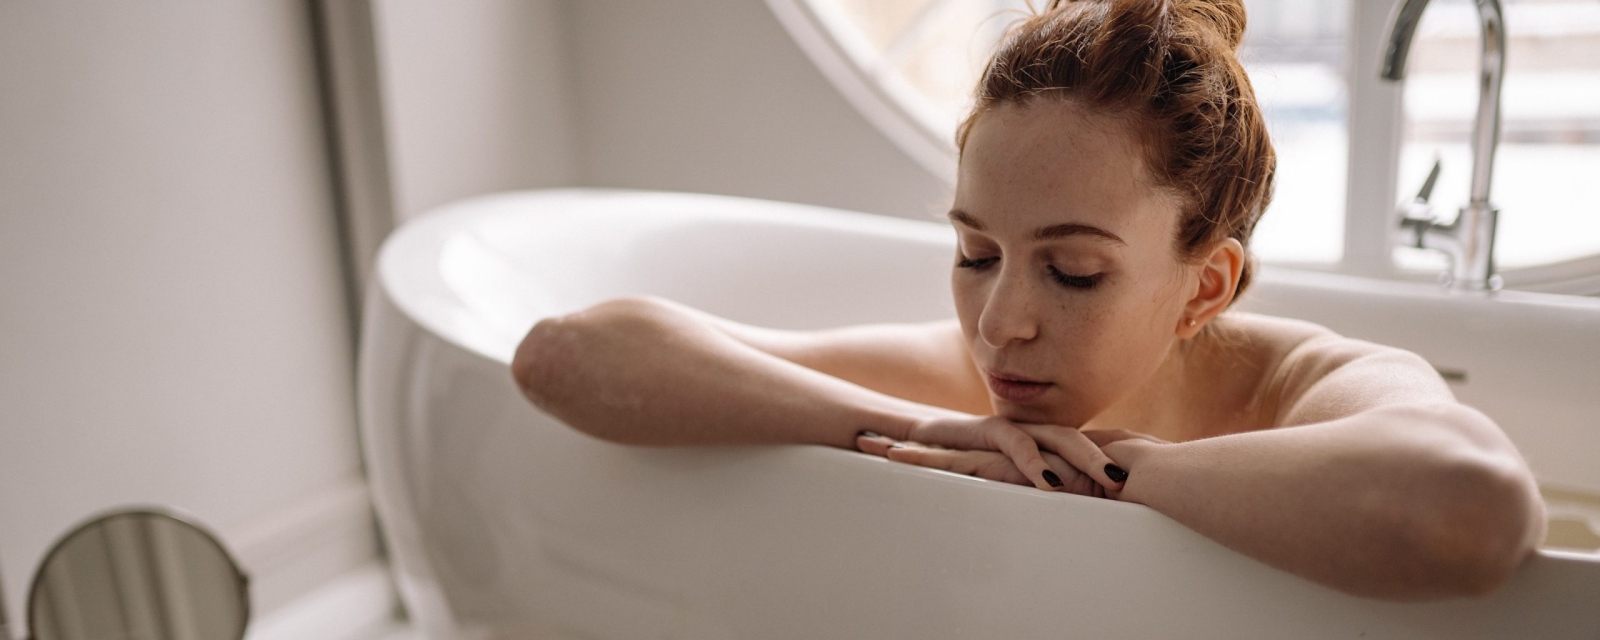 Red head woman relaxing in a white and free standing bathtub by Studium Dekor.